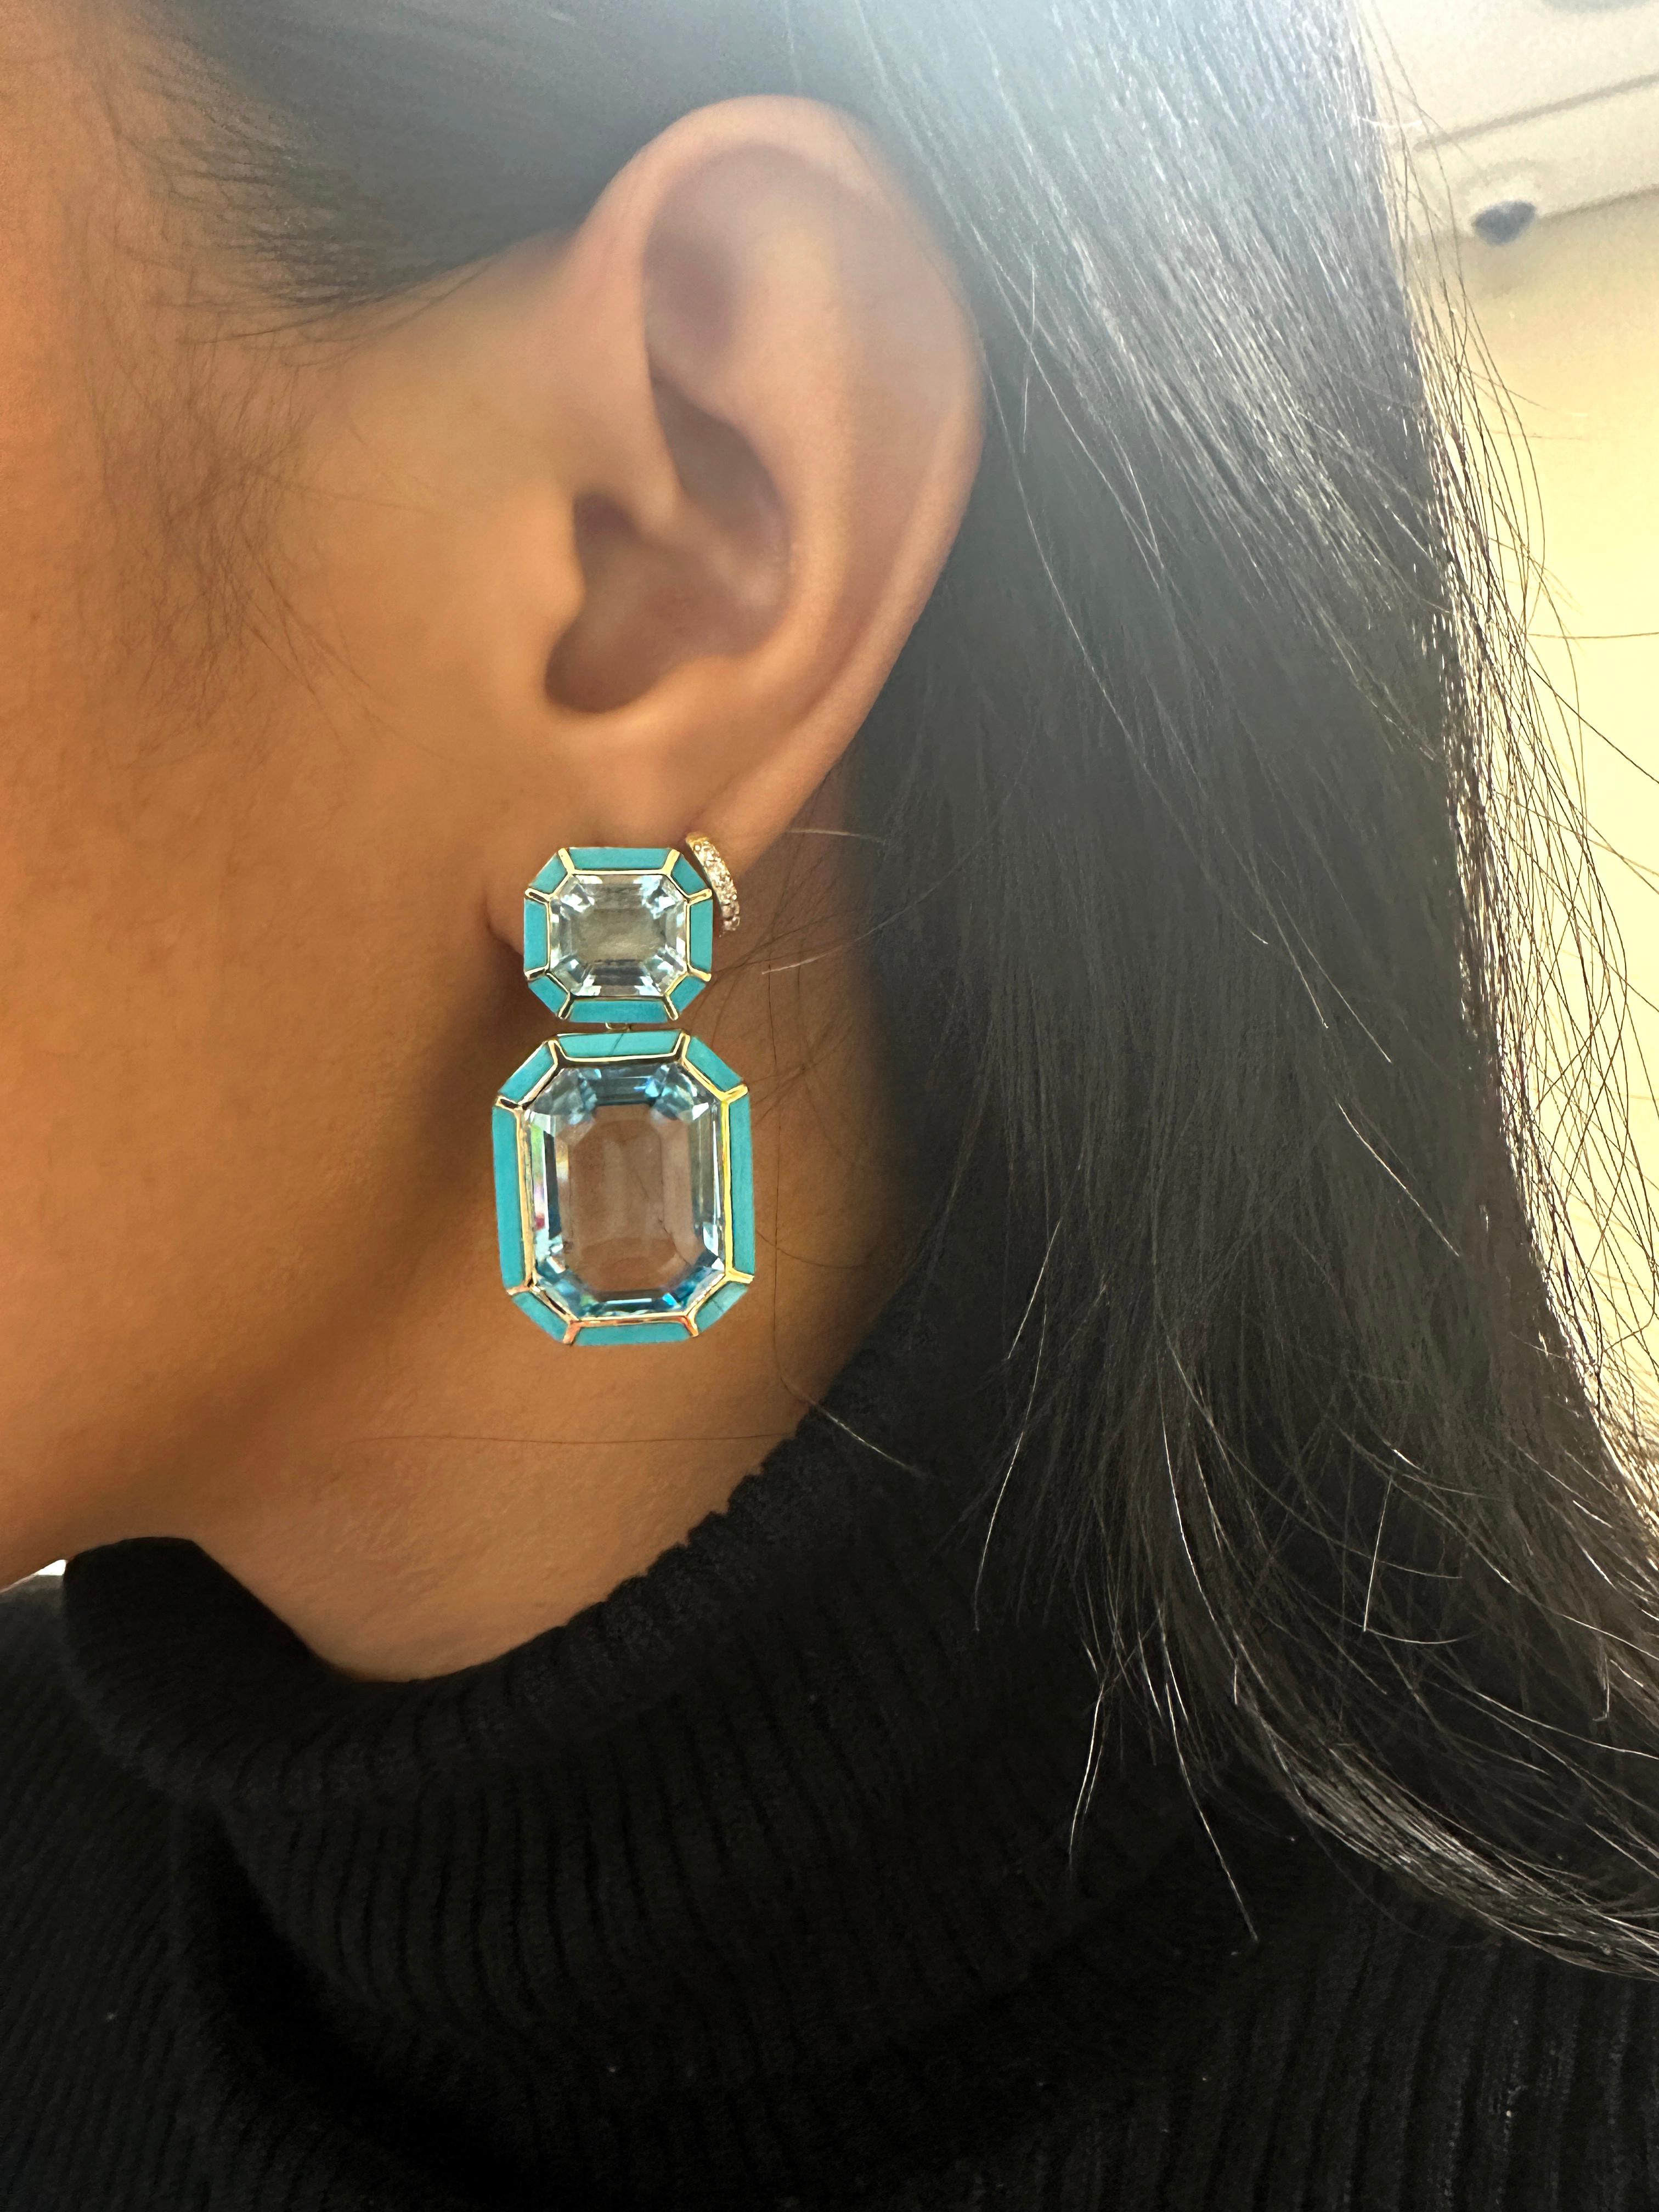 These Blue Topaz and Turquoise Emerald Cut Earrings in 18K Yellow Gold are a stunning addition to the 'Mélange' Collection. The earrings feature a beautiful blend of blue topaz and turquoise gemstones, cut in an emerald shape, and set in 18K yellow